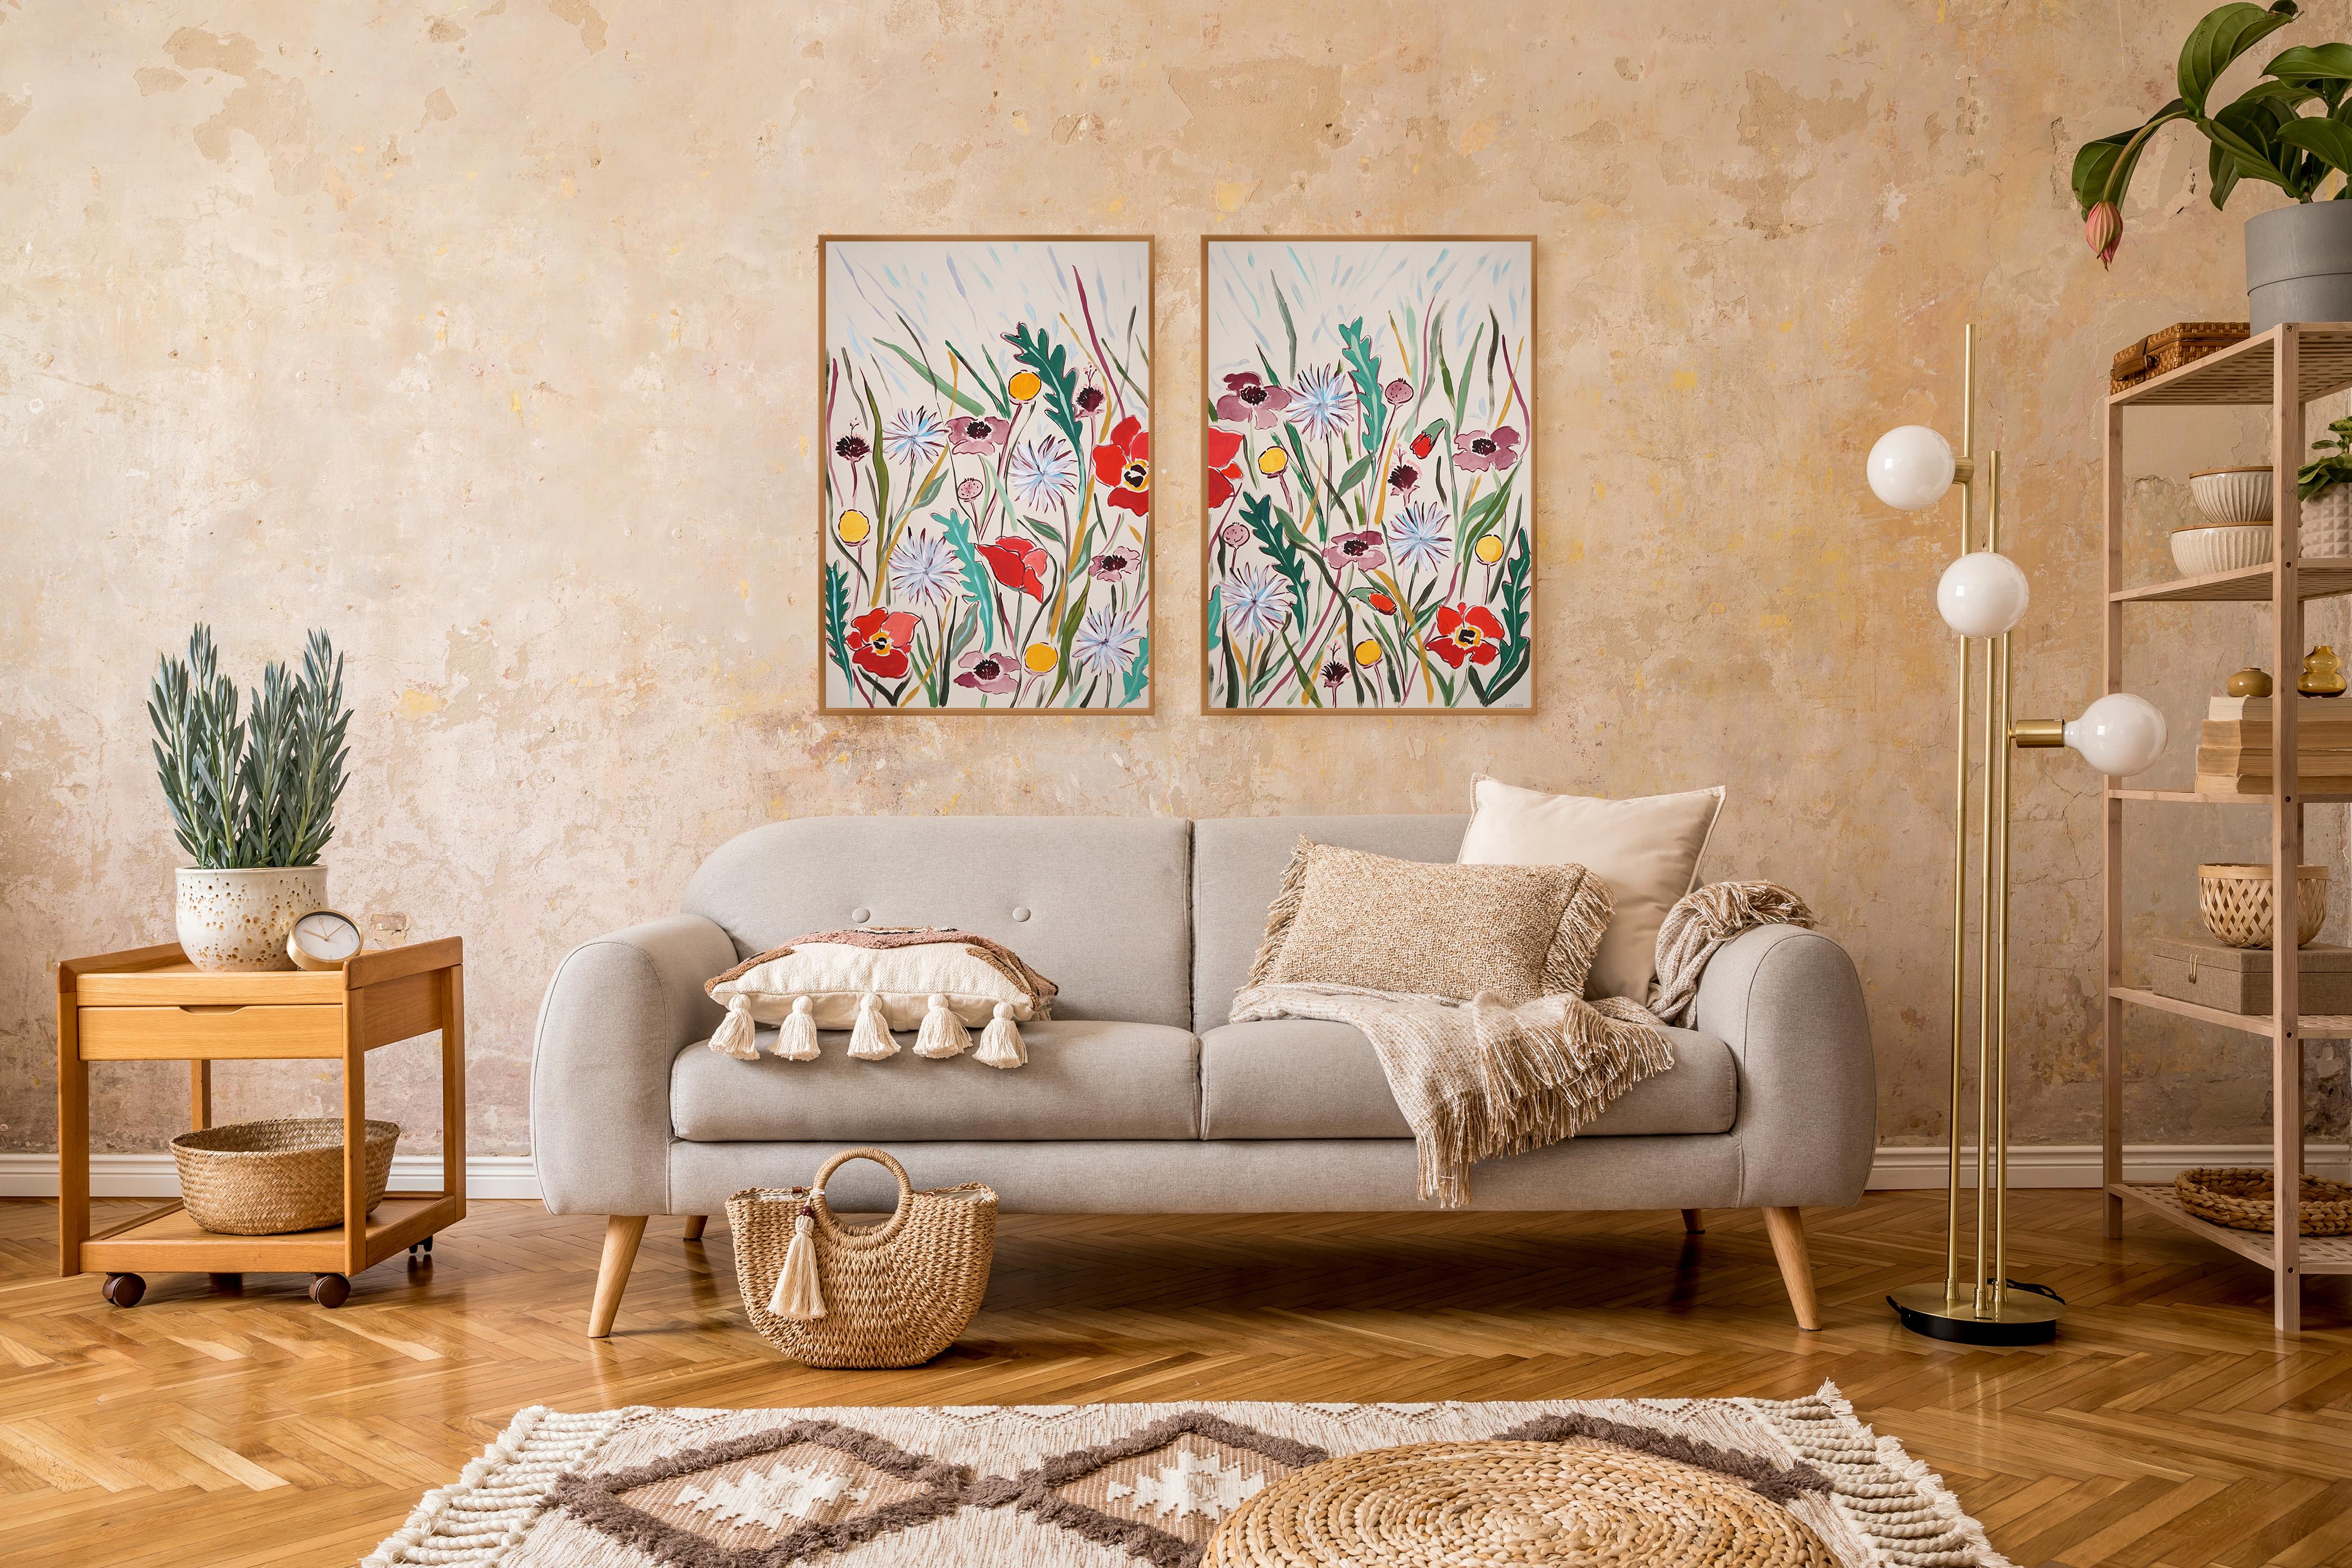 Pastel Wildflowers II, Illustration Style Diptych, Red Poppies and Dandelions  - Naturalistic Painting by Romina Milano